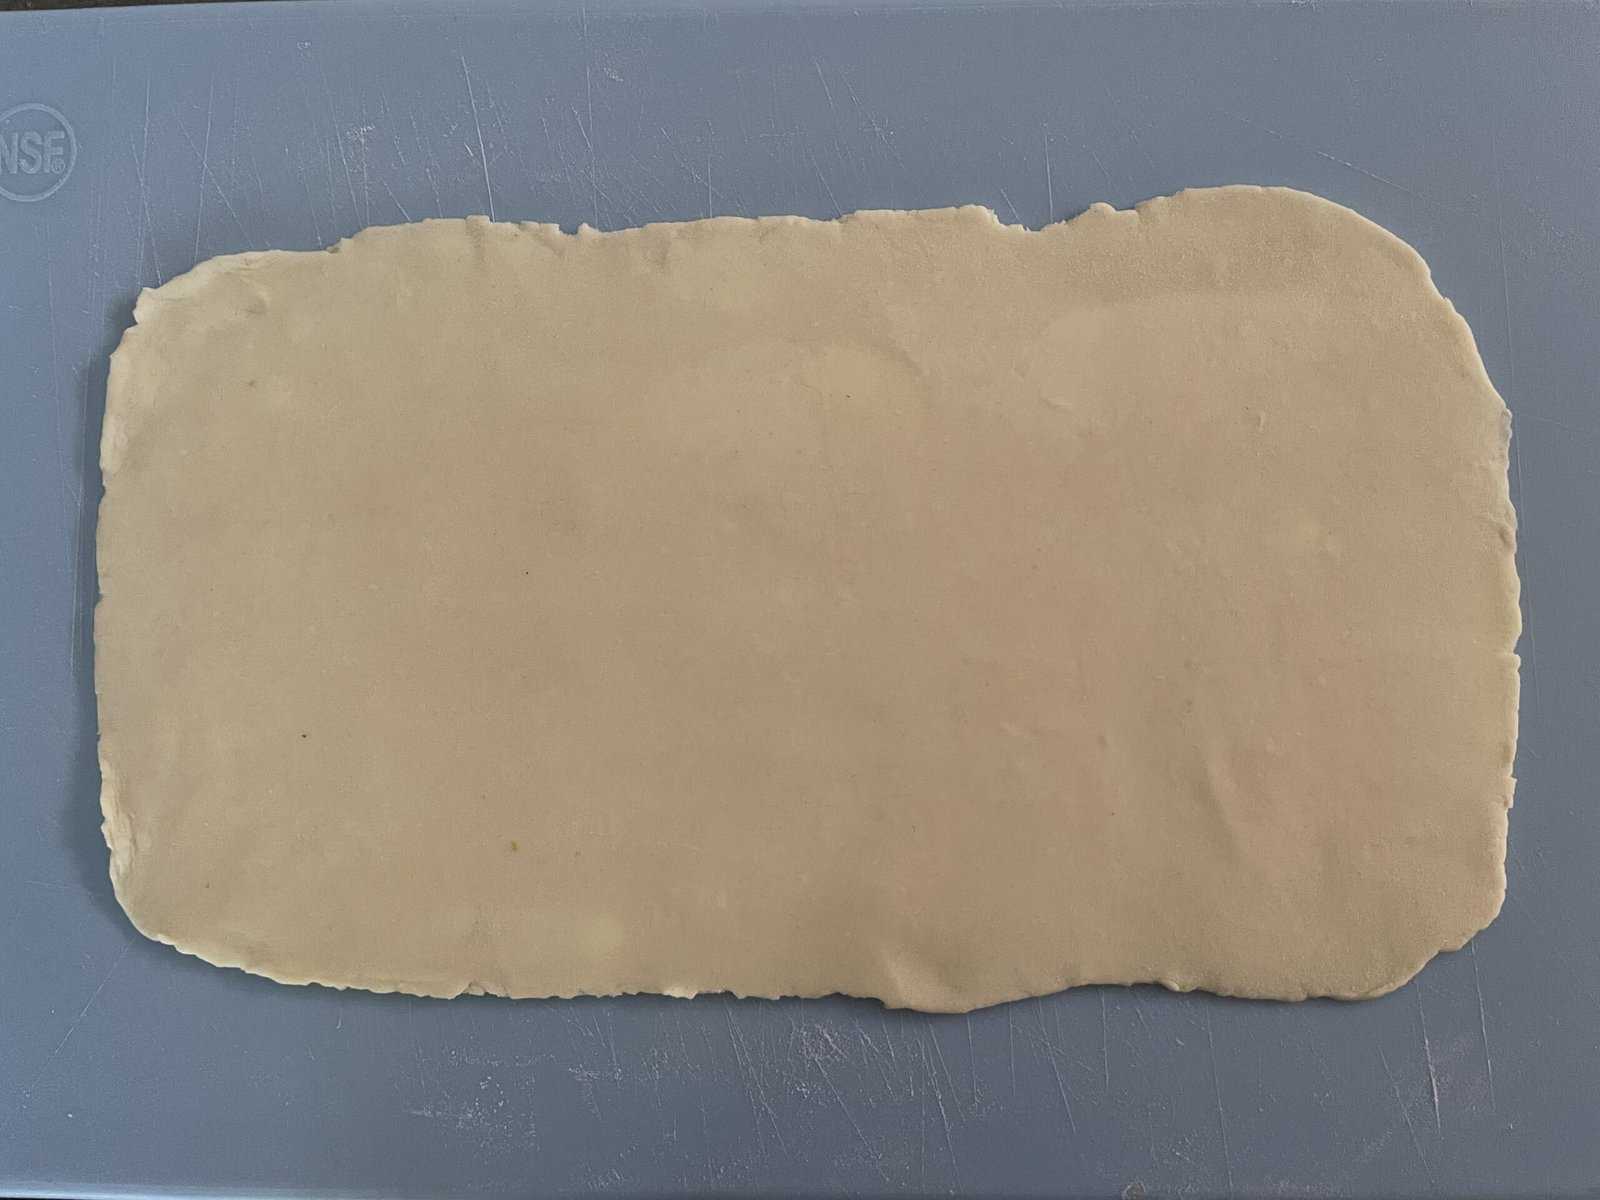 rectangle of pastry dough on a blue cutting board.